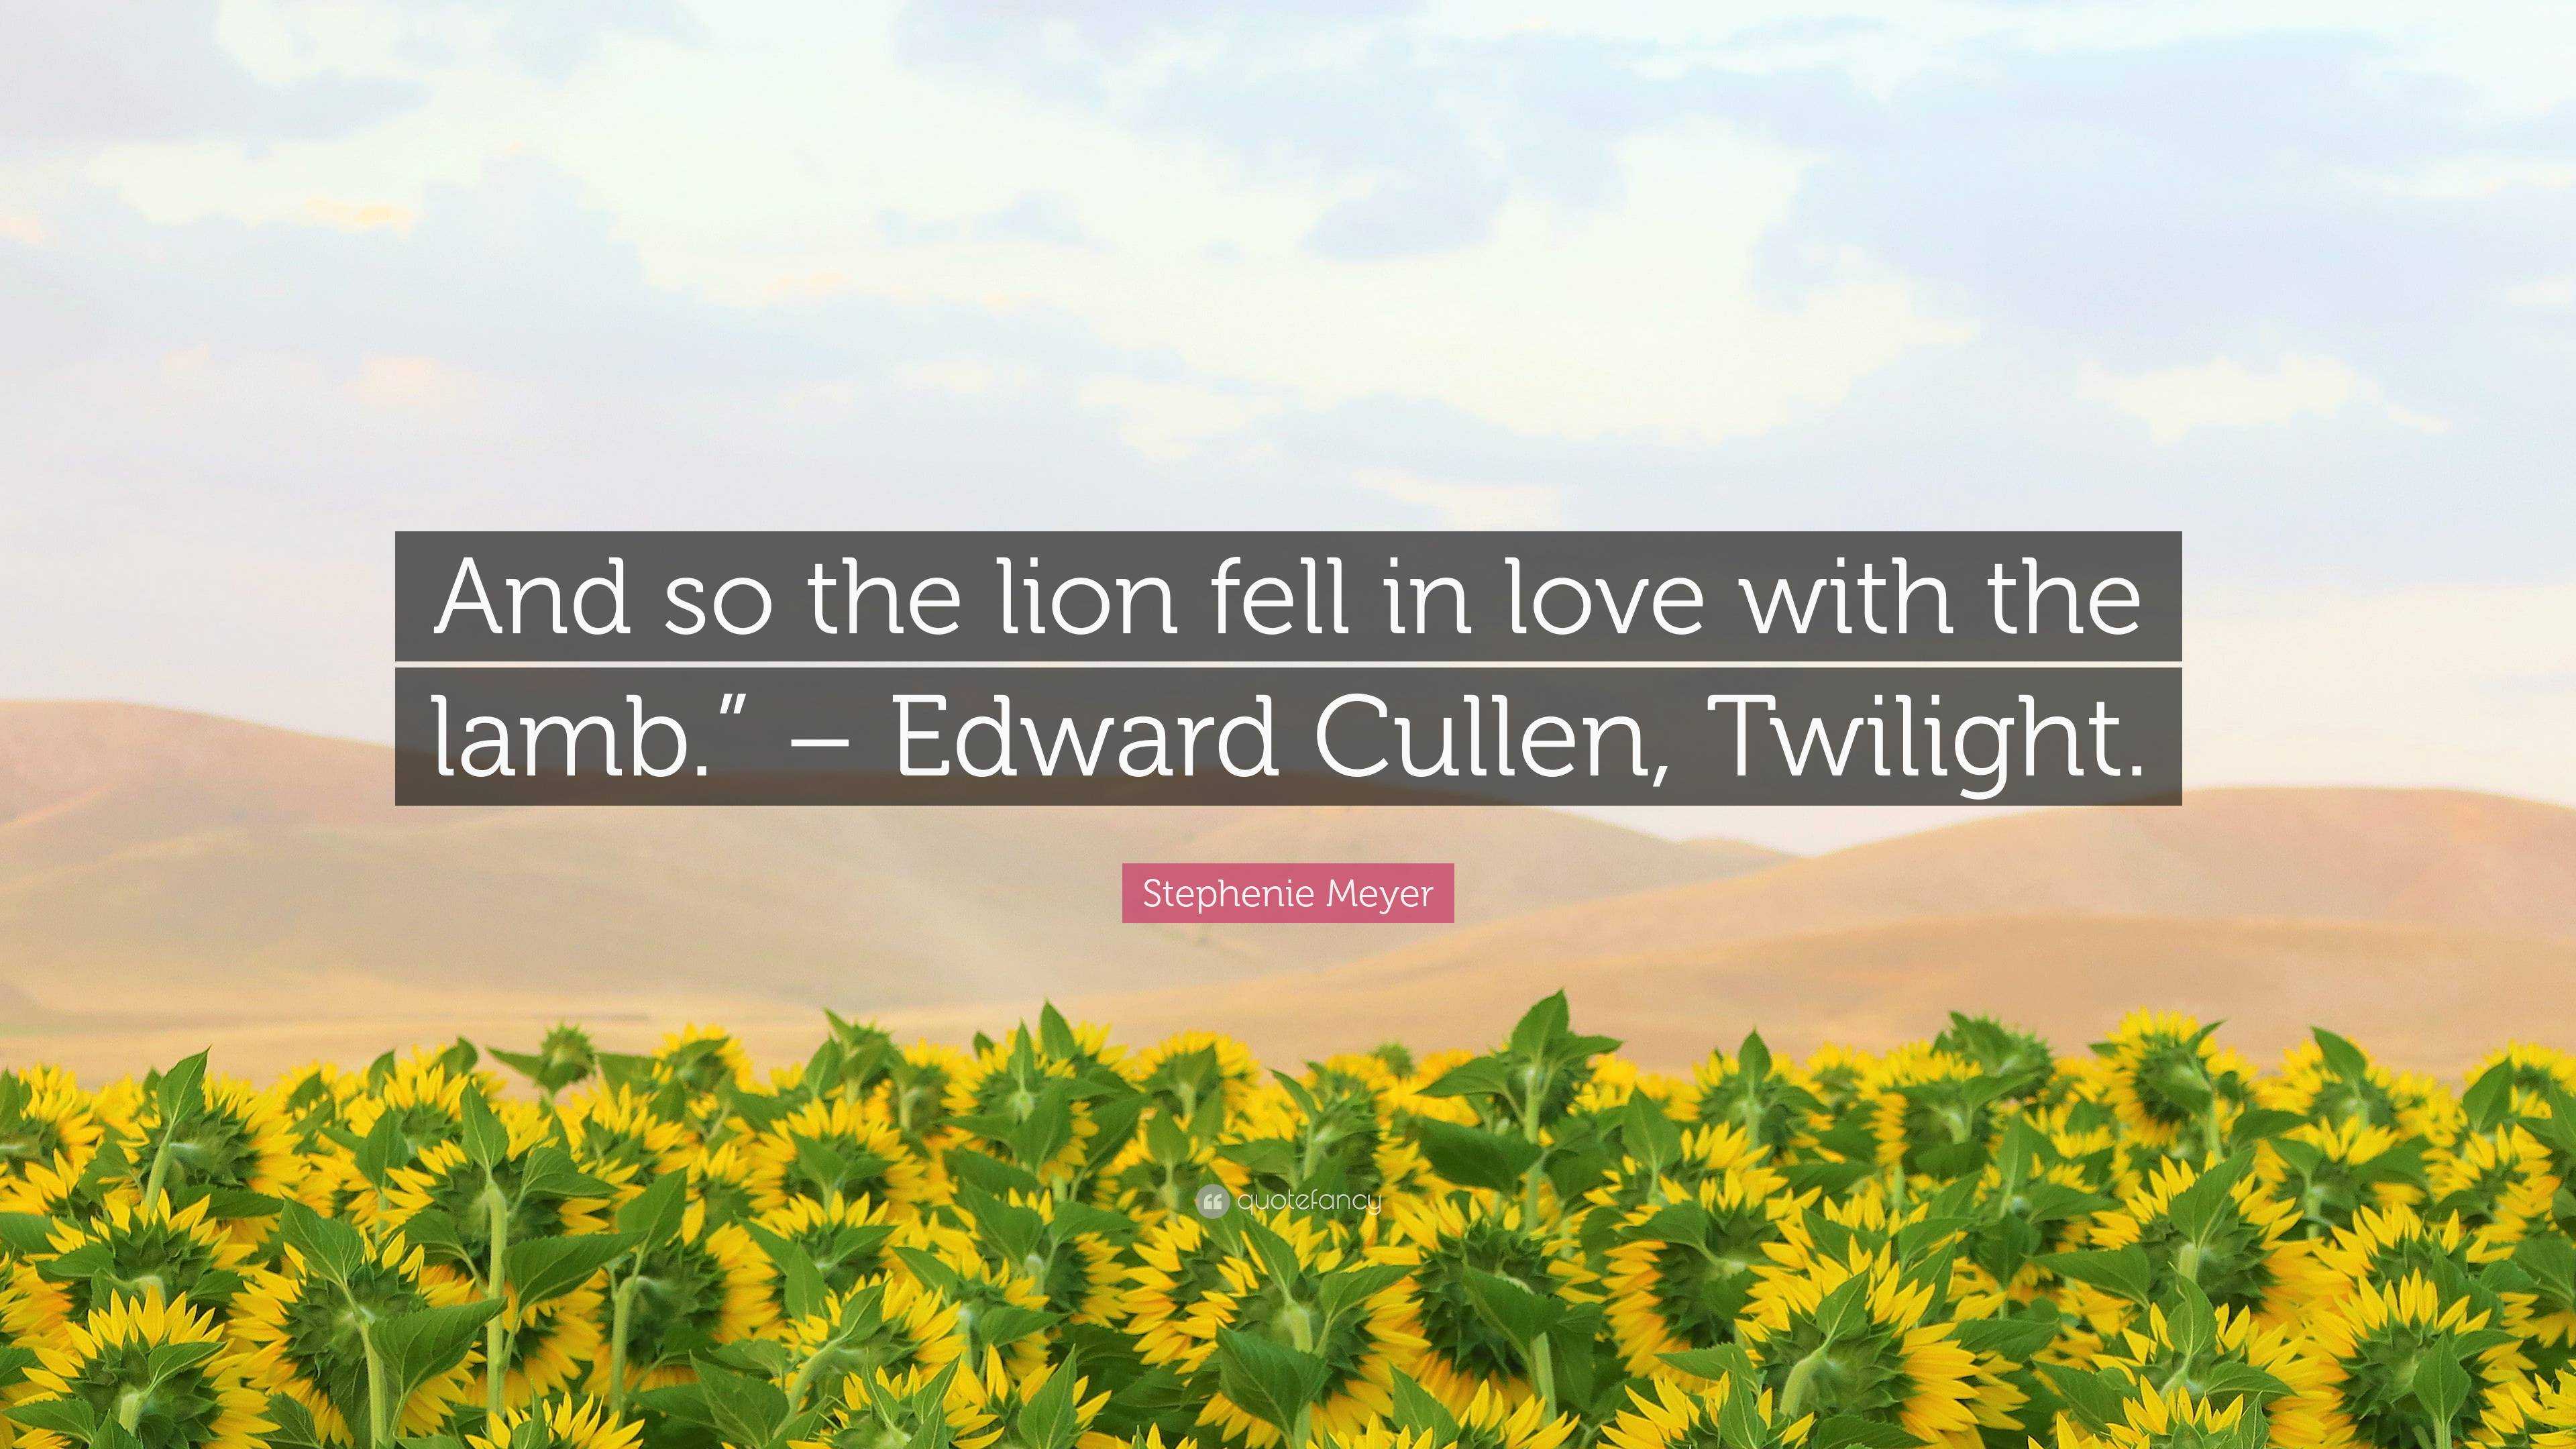 twilight and so the lion fell in love with the lamb quote